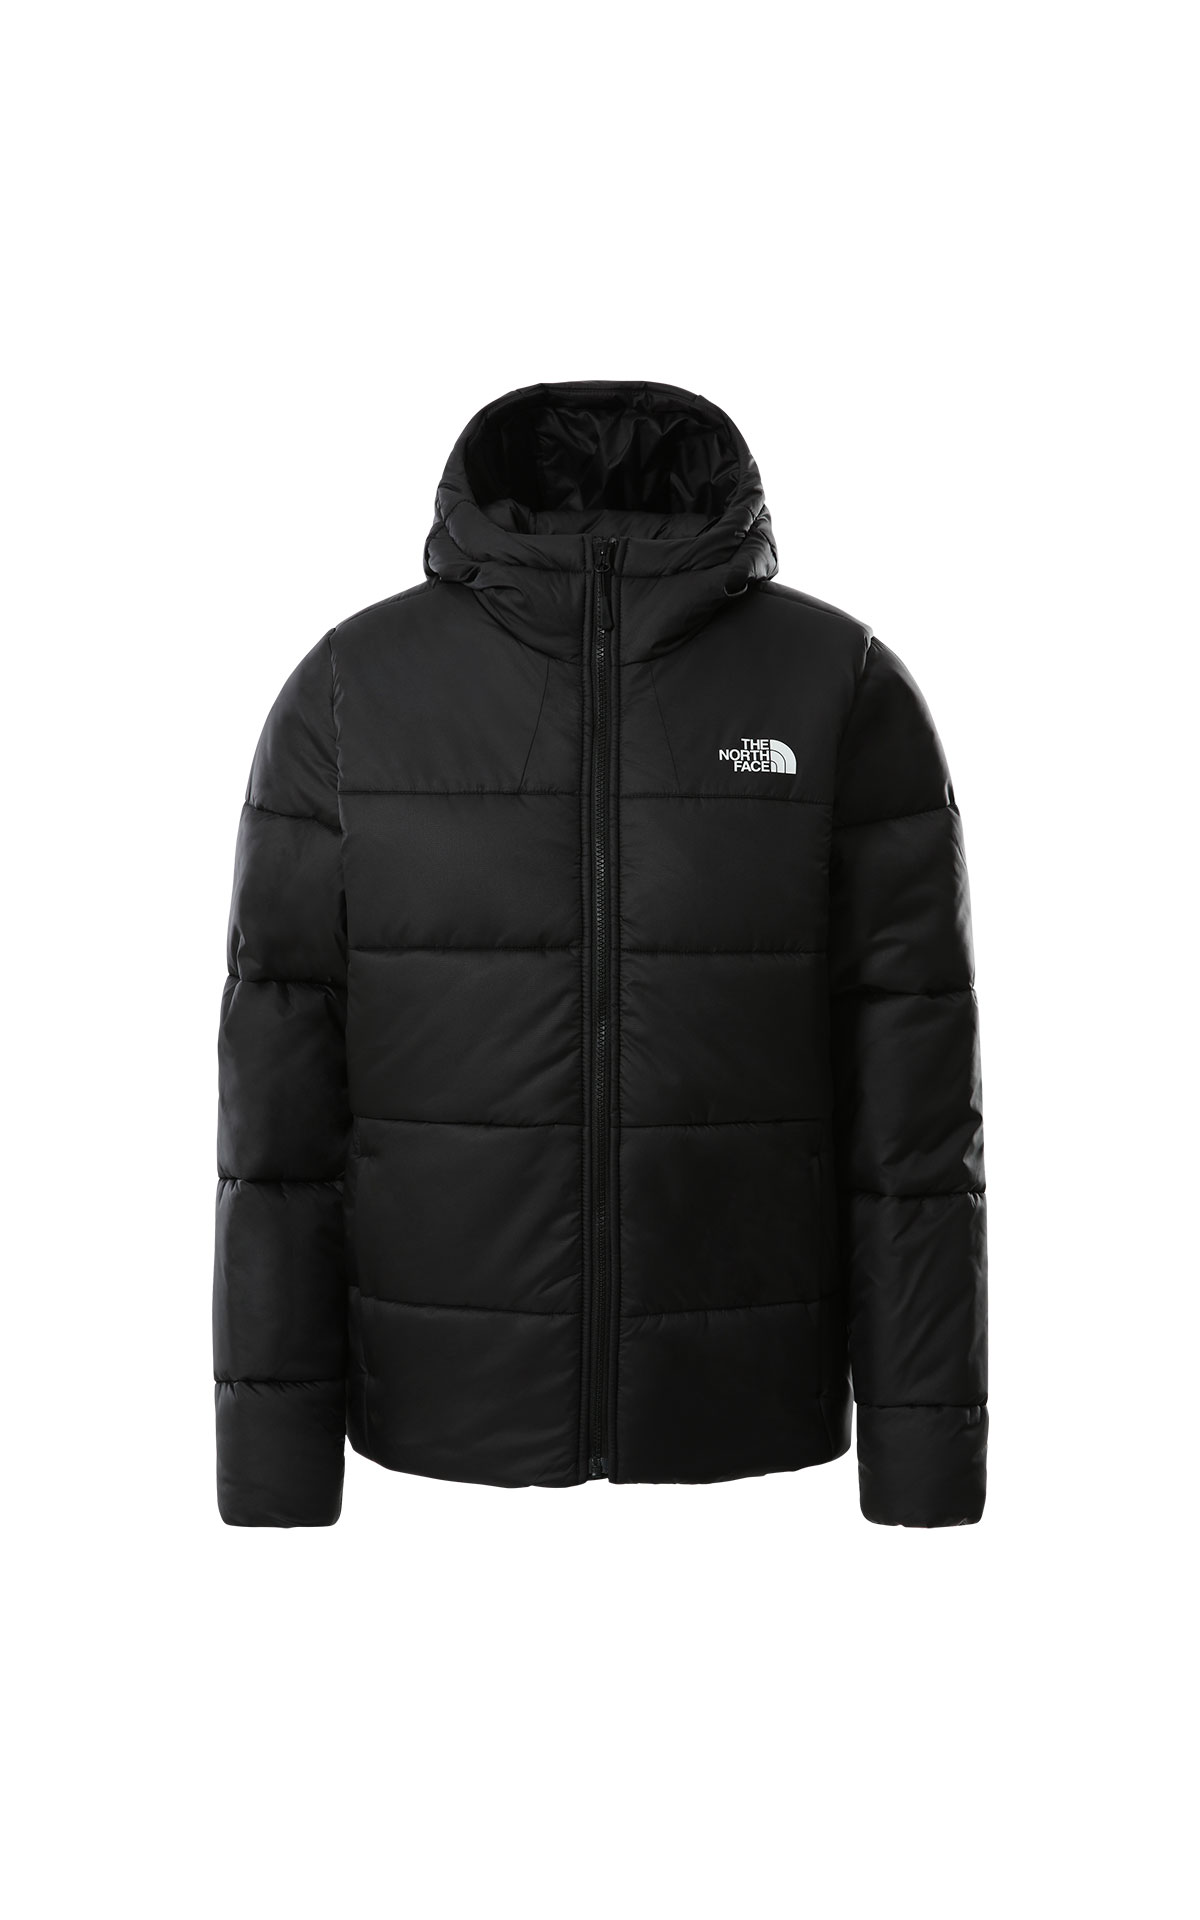 north face kildare outlet